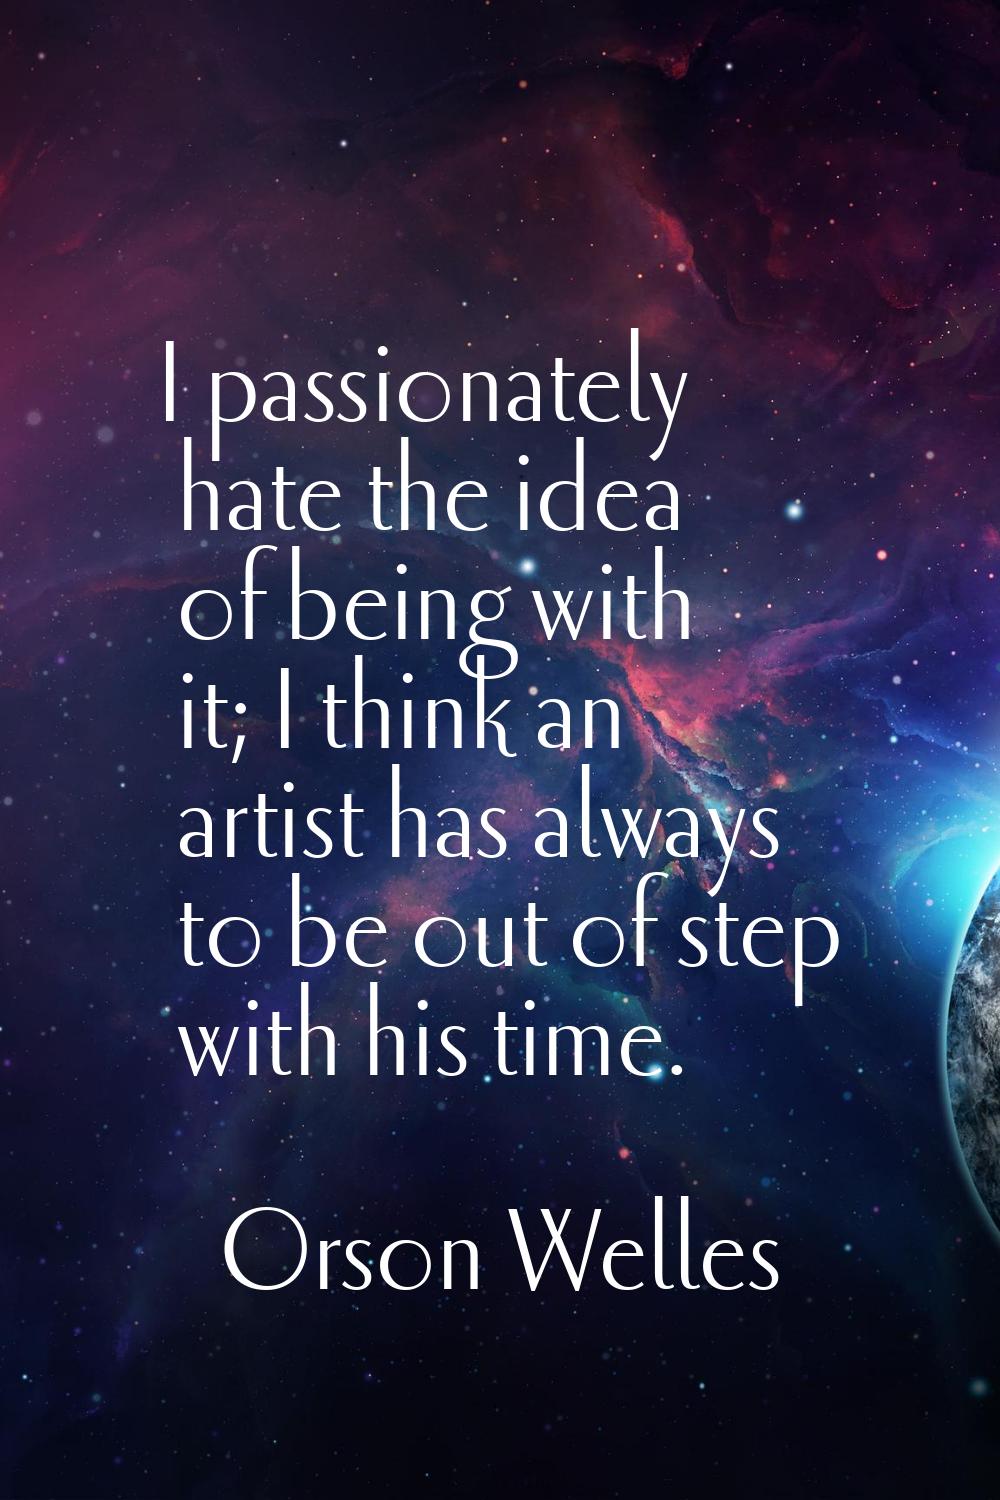 I passionately hate the idea of being with it; I think an artist has always to be out of step with 